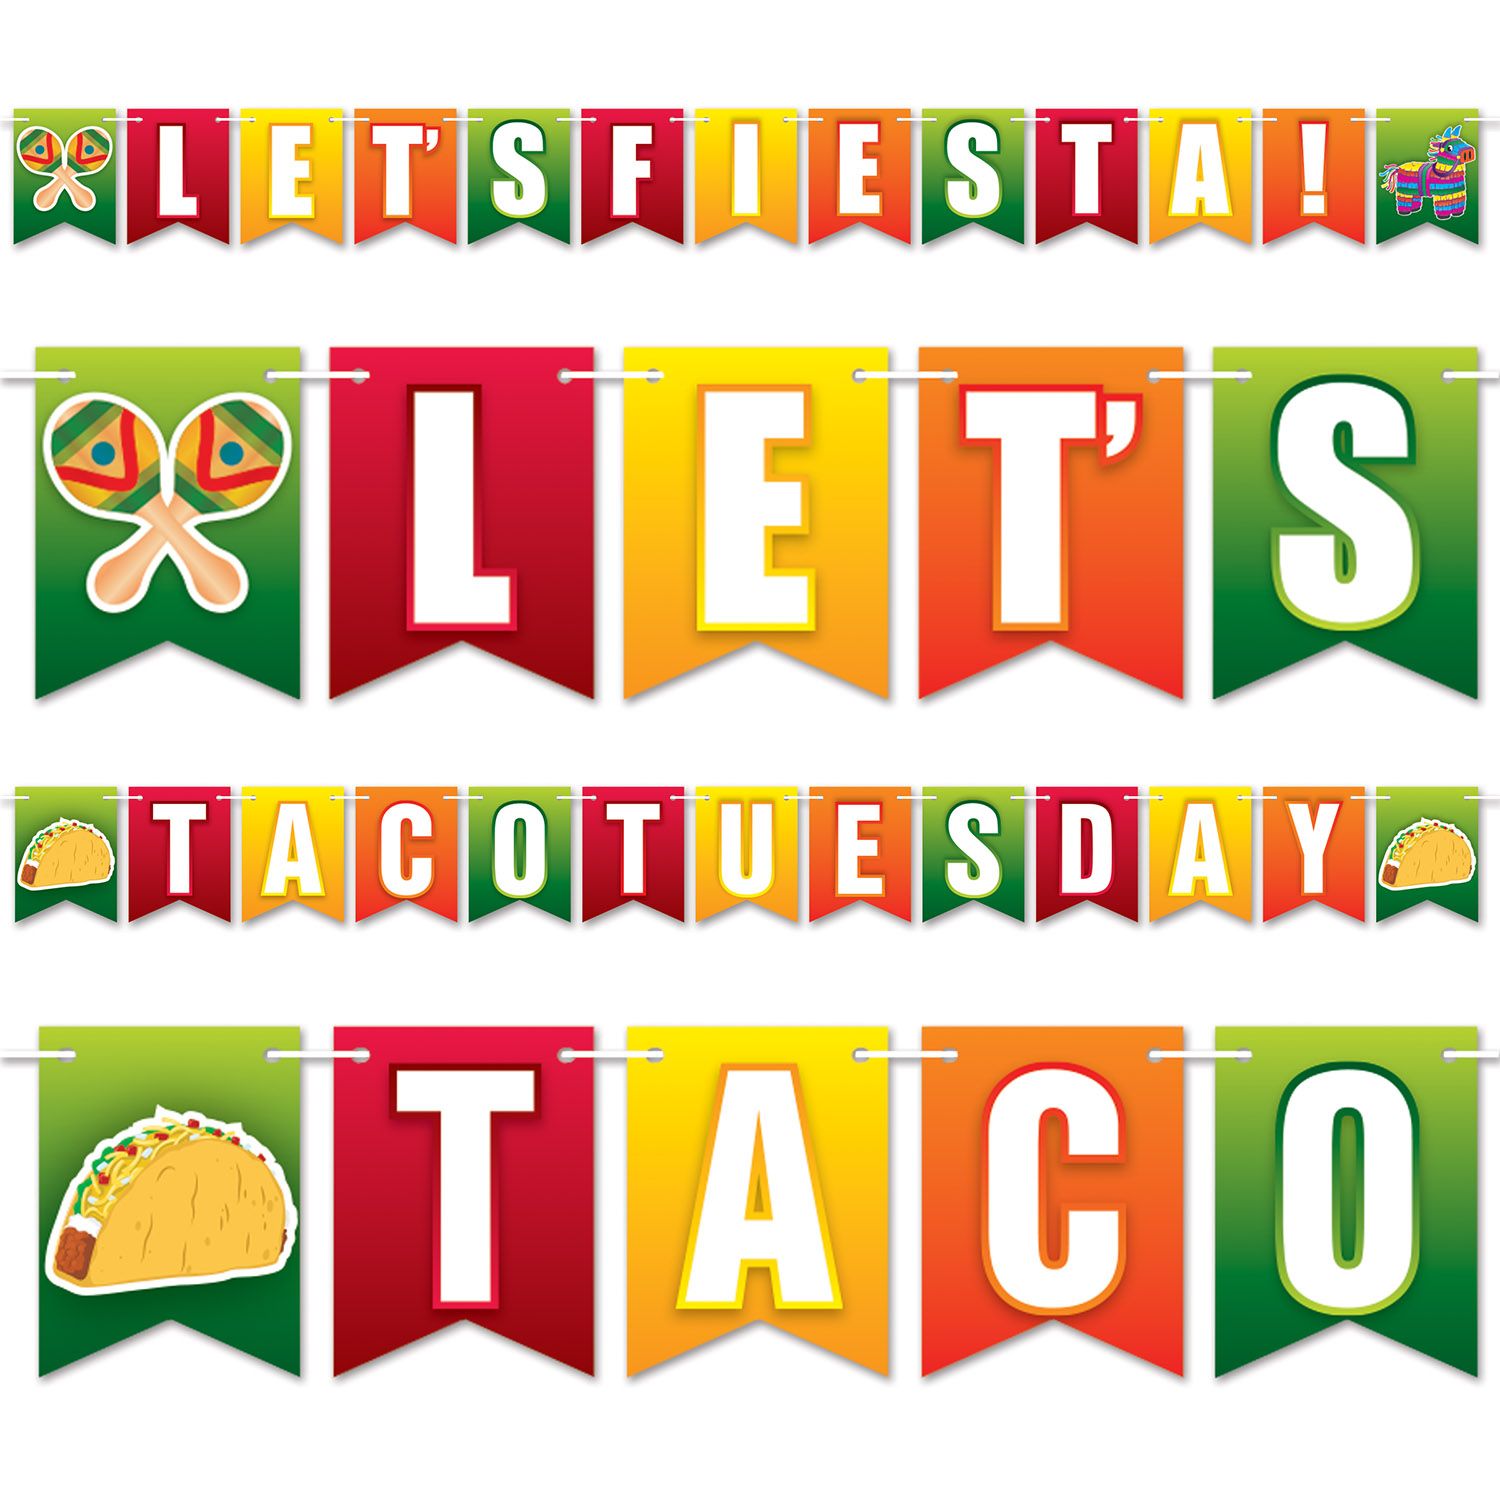 Let's Fiesta! & Taco Tuesday Banner